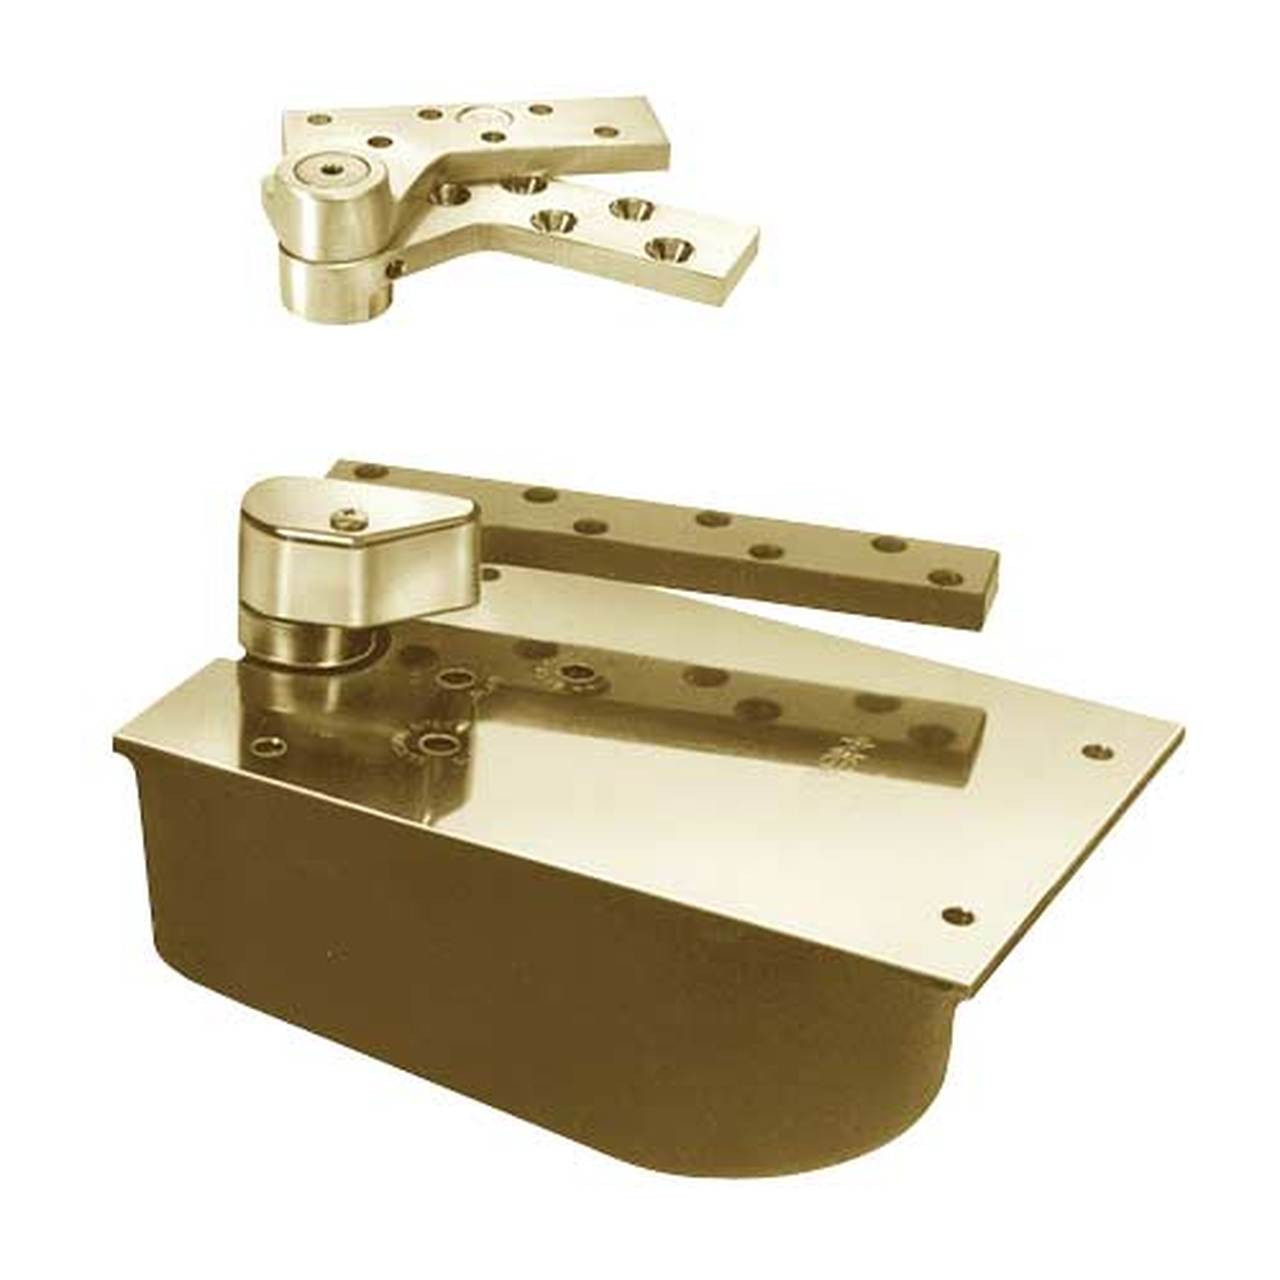 L27-95S-LFP-LCC-RH-3-606 Rixson 27 Series Extra Heavy Duty Lead Lined Offset Floor Closer in Satin Brass Finish